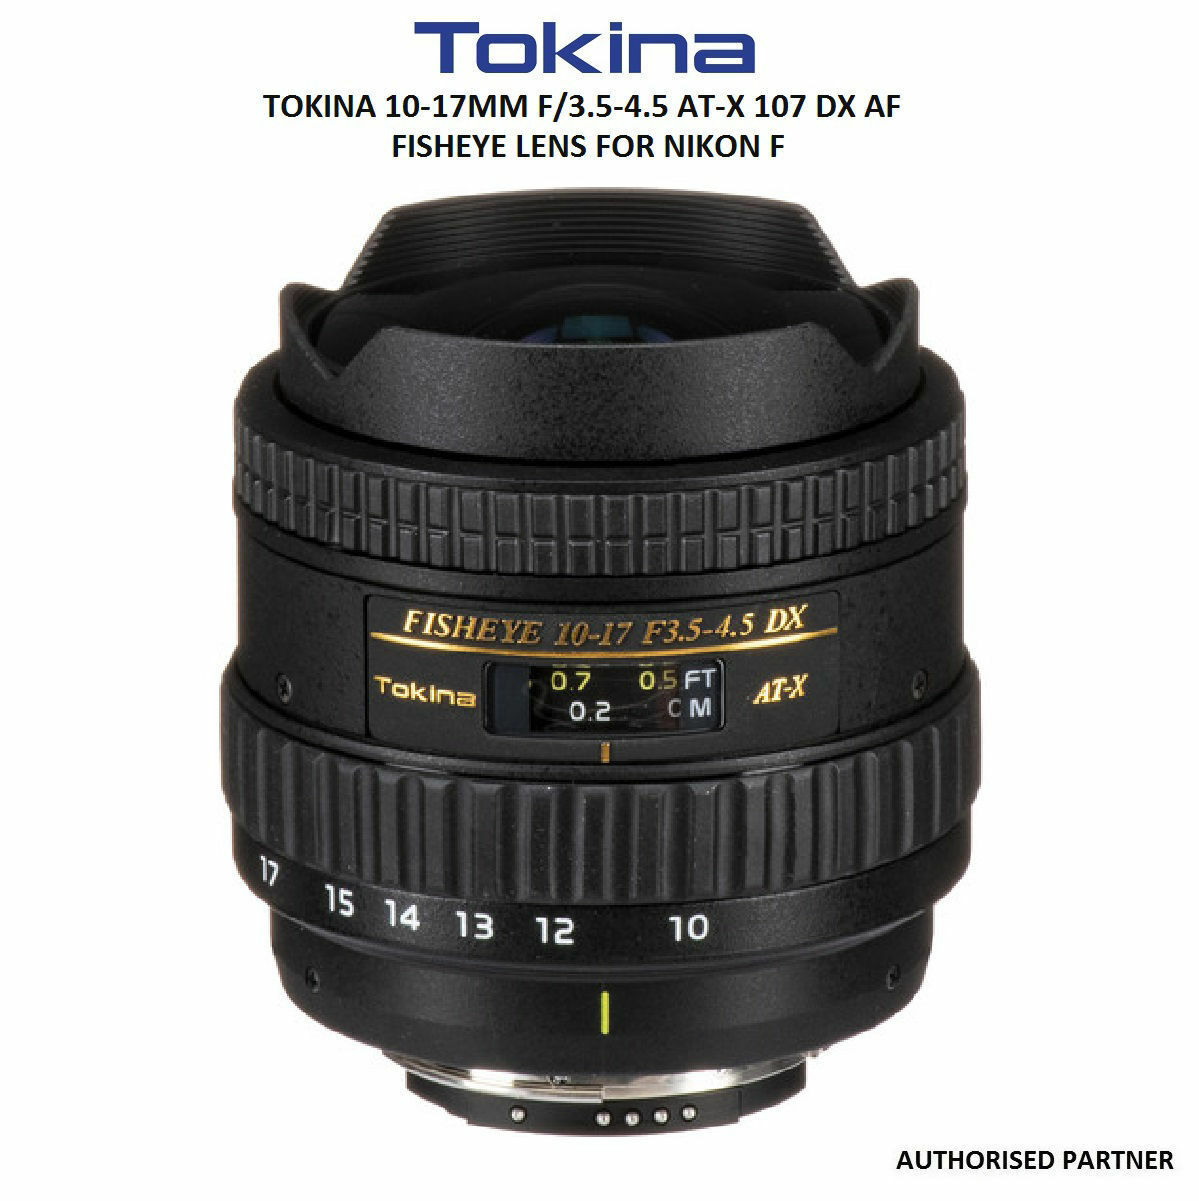 Tokina AT-X 10-17mm f/3.5-4.5 DX ニコン用